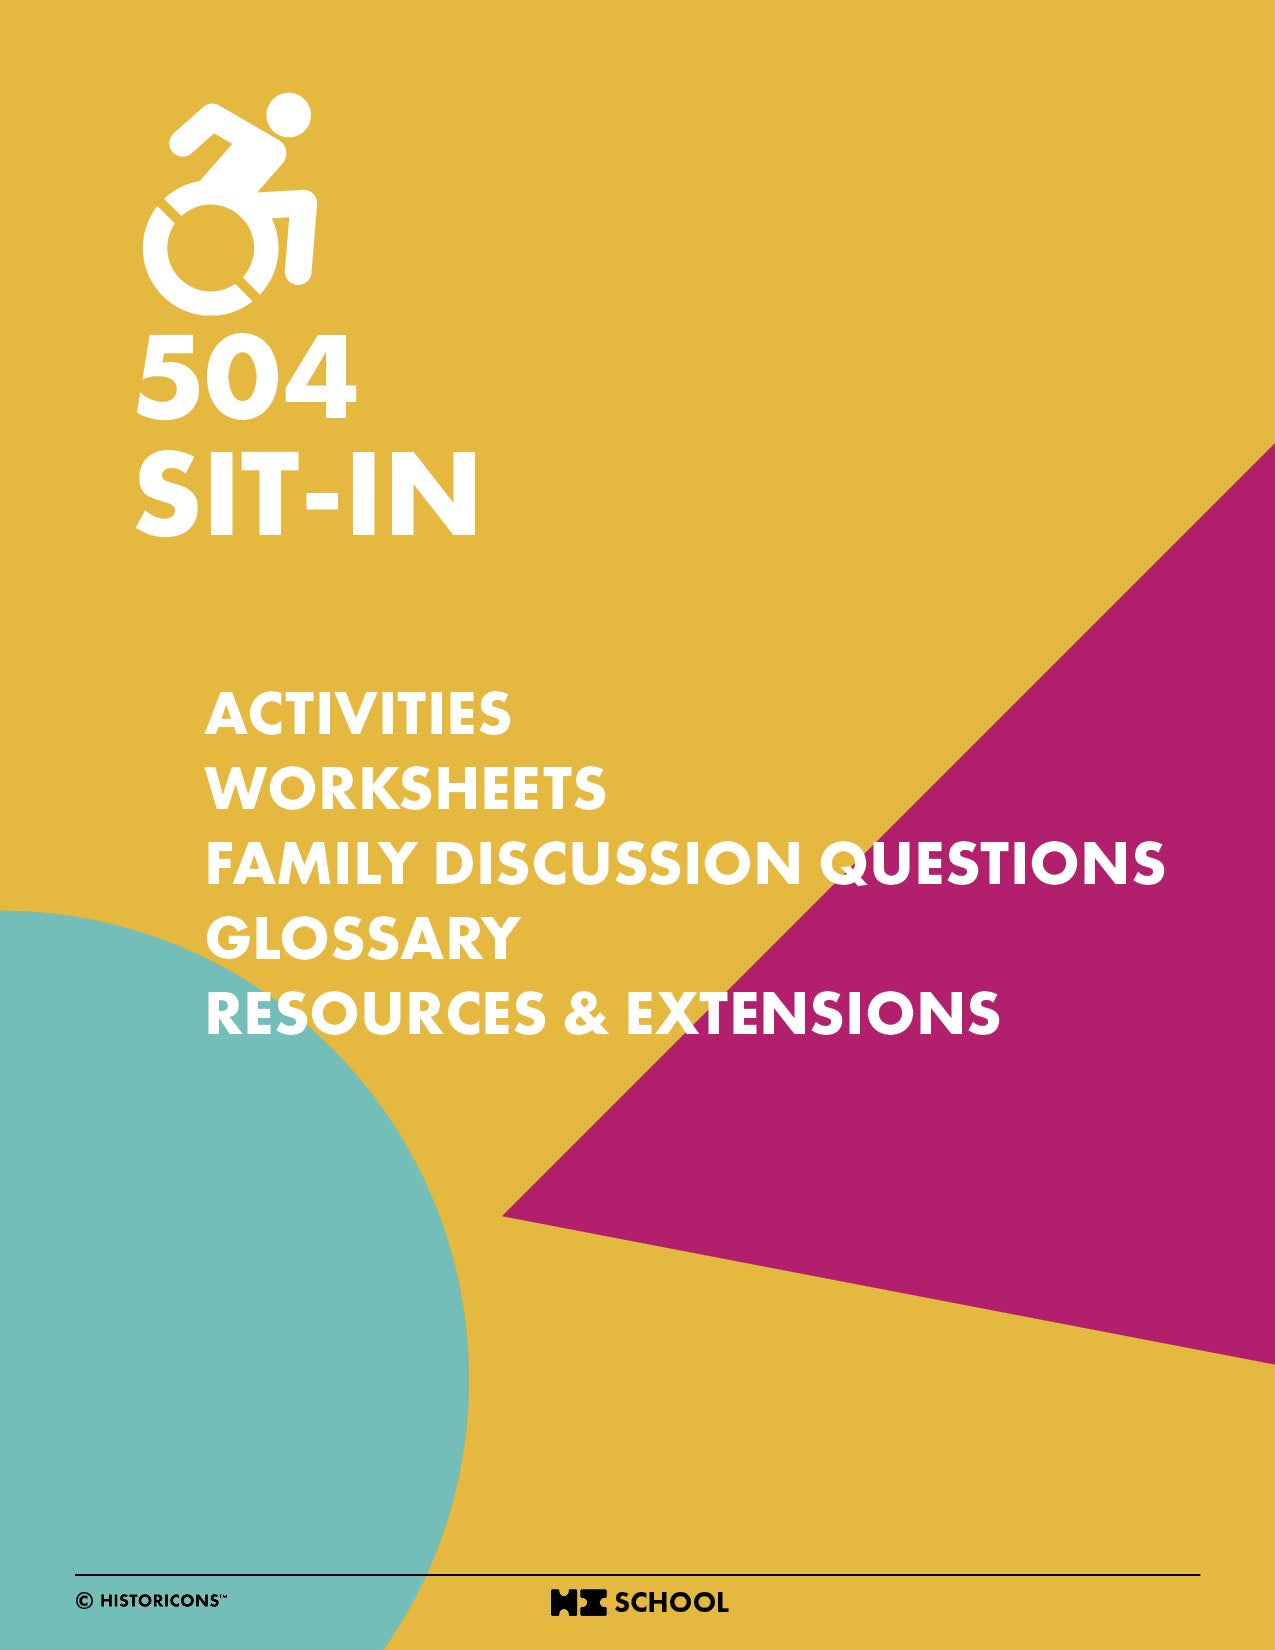 A colorful cover photo of the HI School 504 Sit-In activity pack is displayed, which shows a table of contents for fun diversity activities, Worksheets, Family Discussion Questions, Glossary, and Resources & Extensions to put allyship in action. 